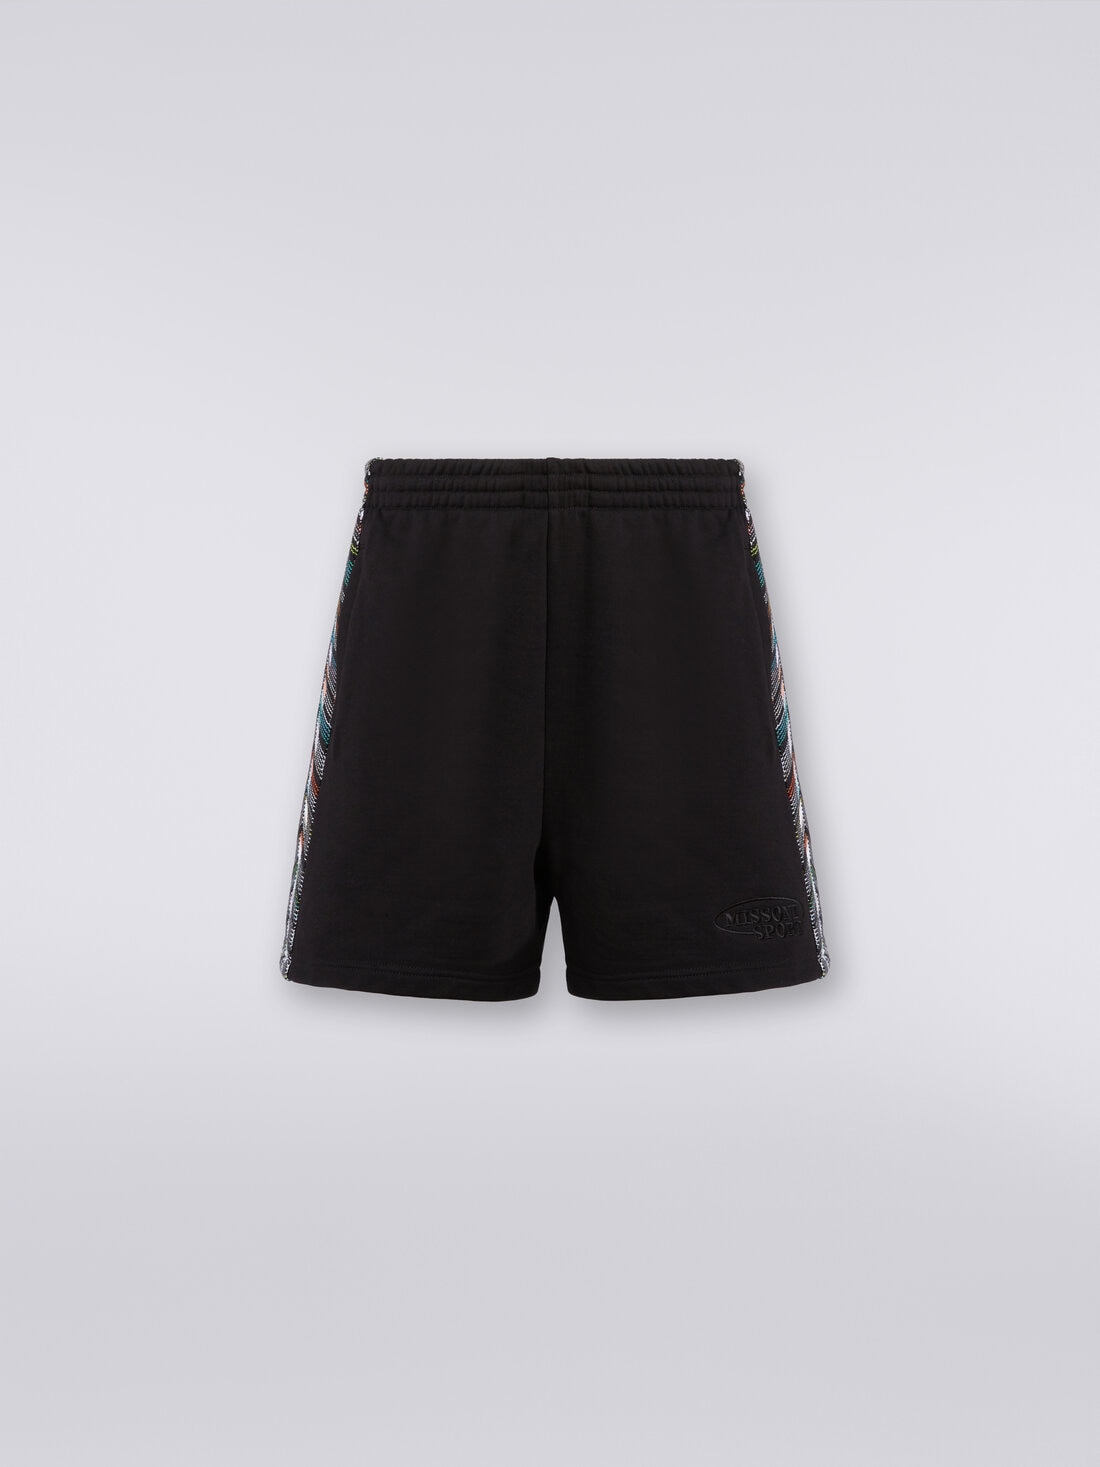 Shorts in fleece with logo and knitted side bands, Black    - TS24SI01BJ00JVS91J4 - 0